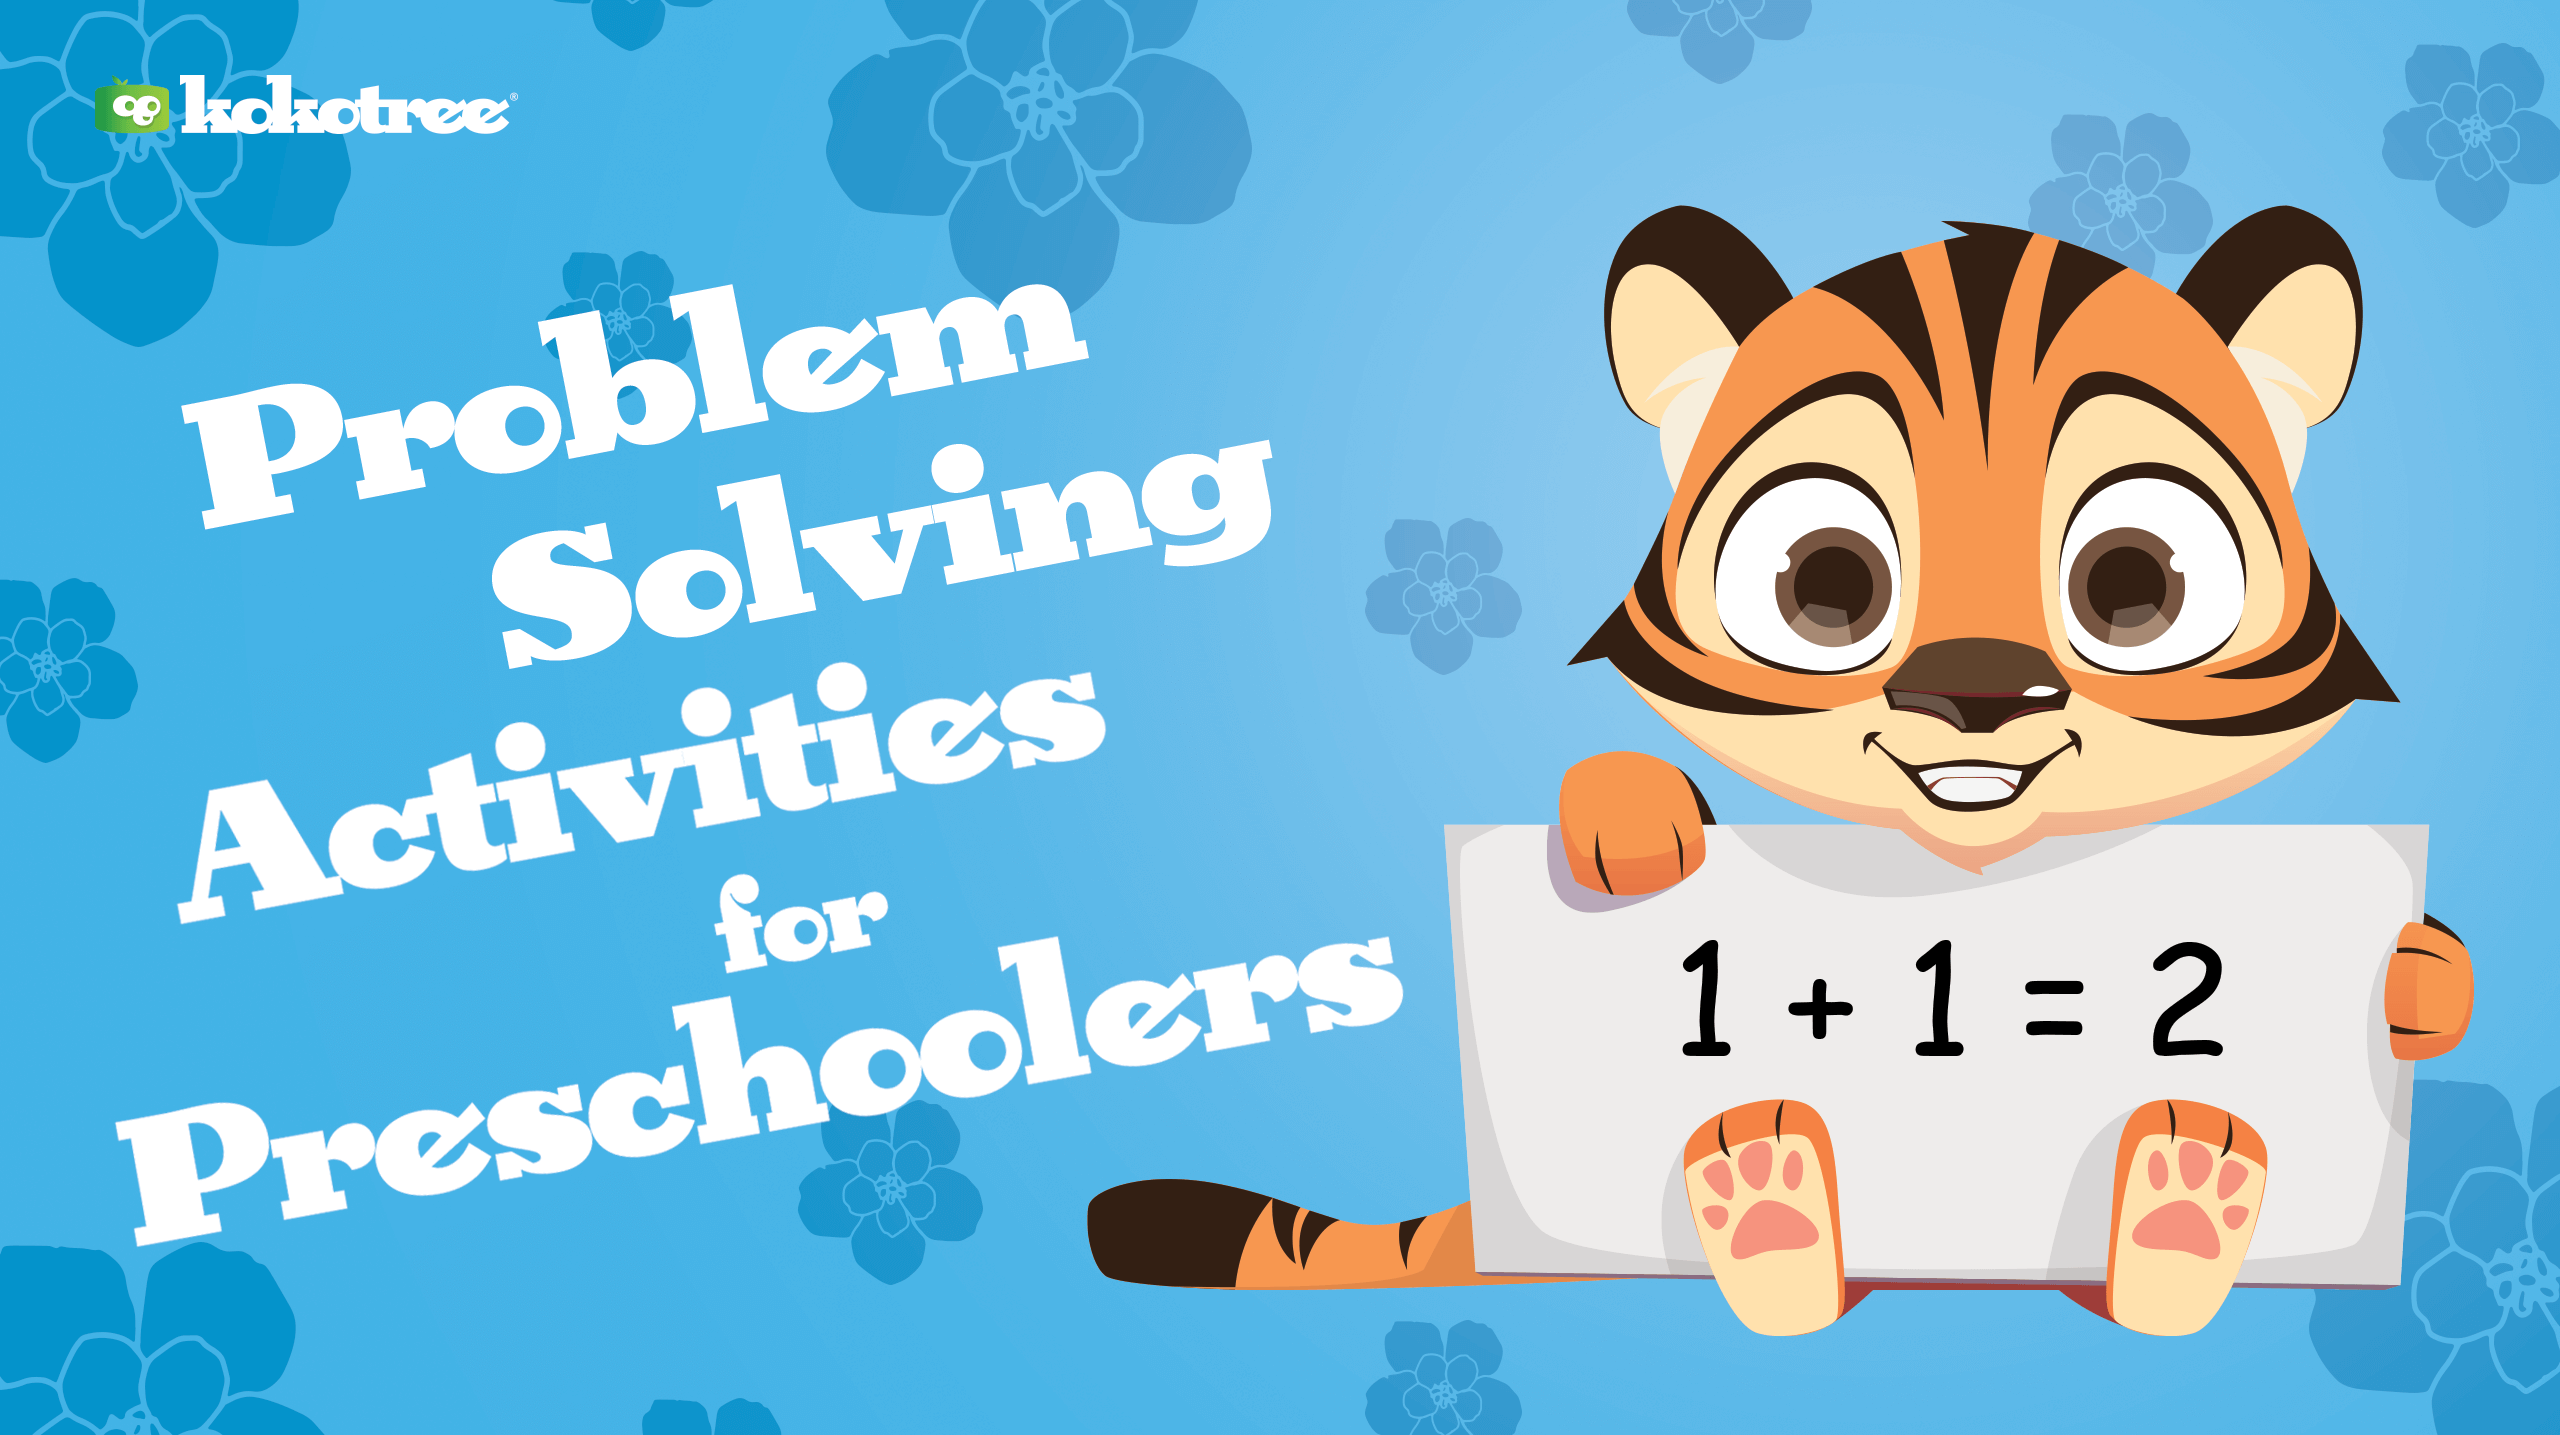 activities to develop problem solving skills